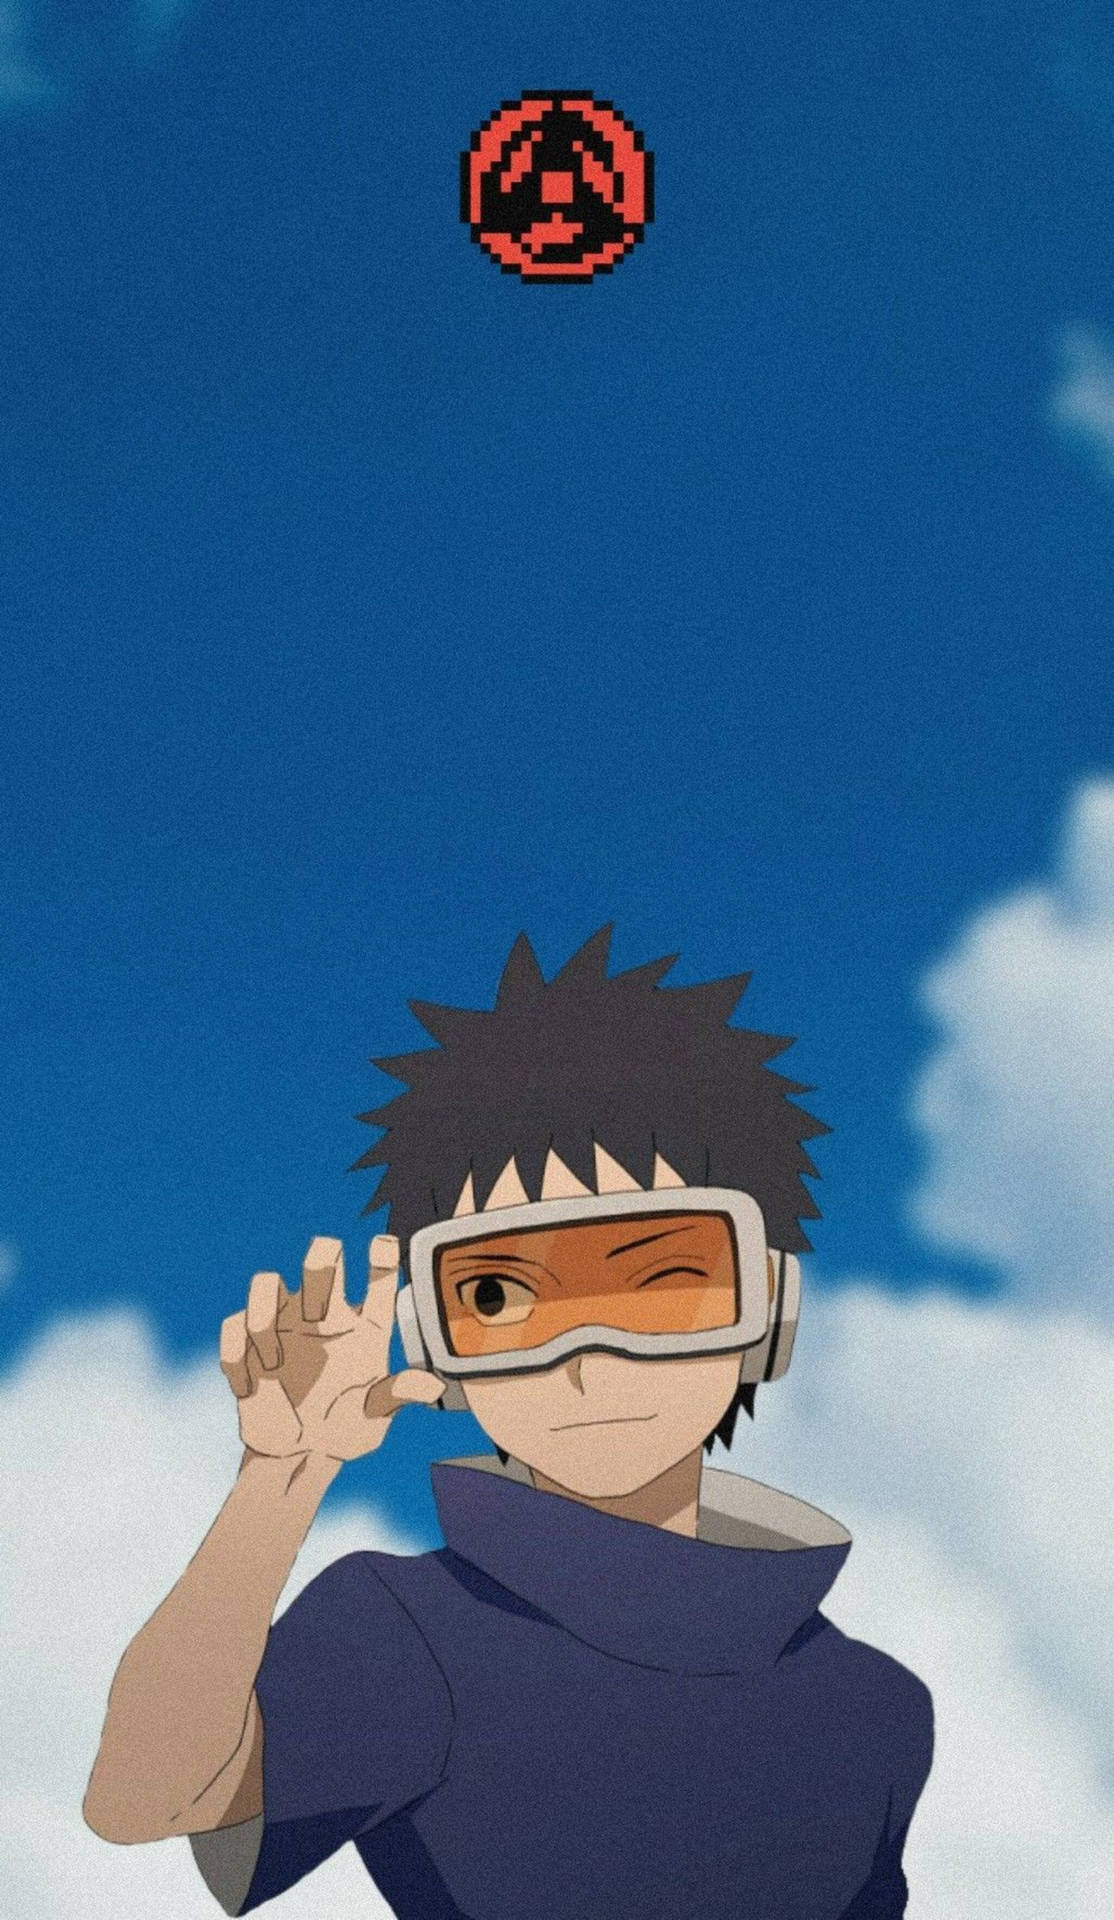 A Young Obito Showing Strength And Courage Background